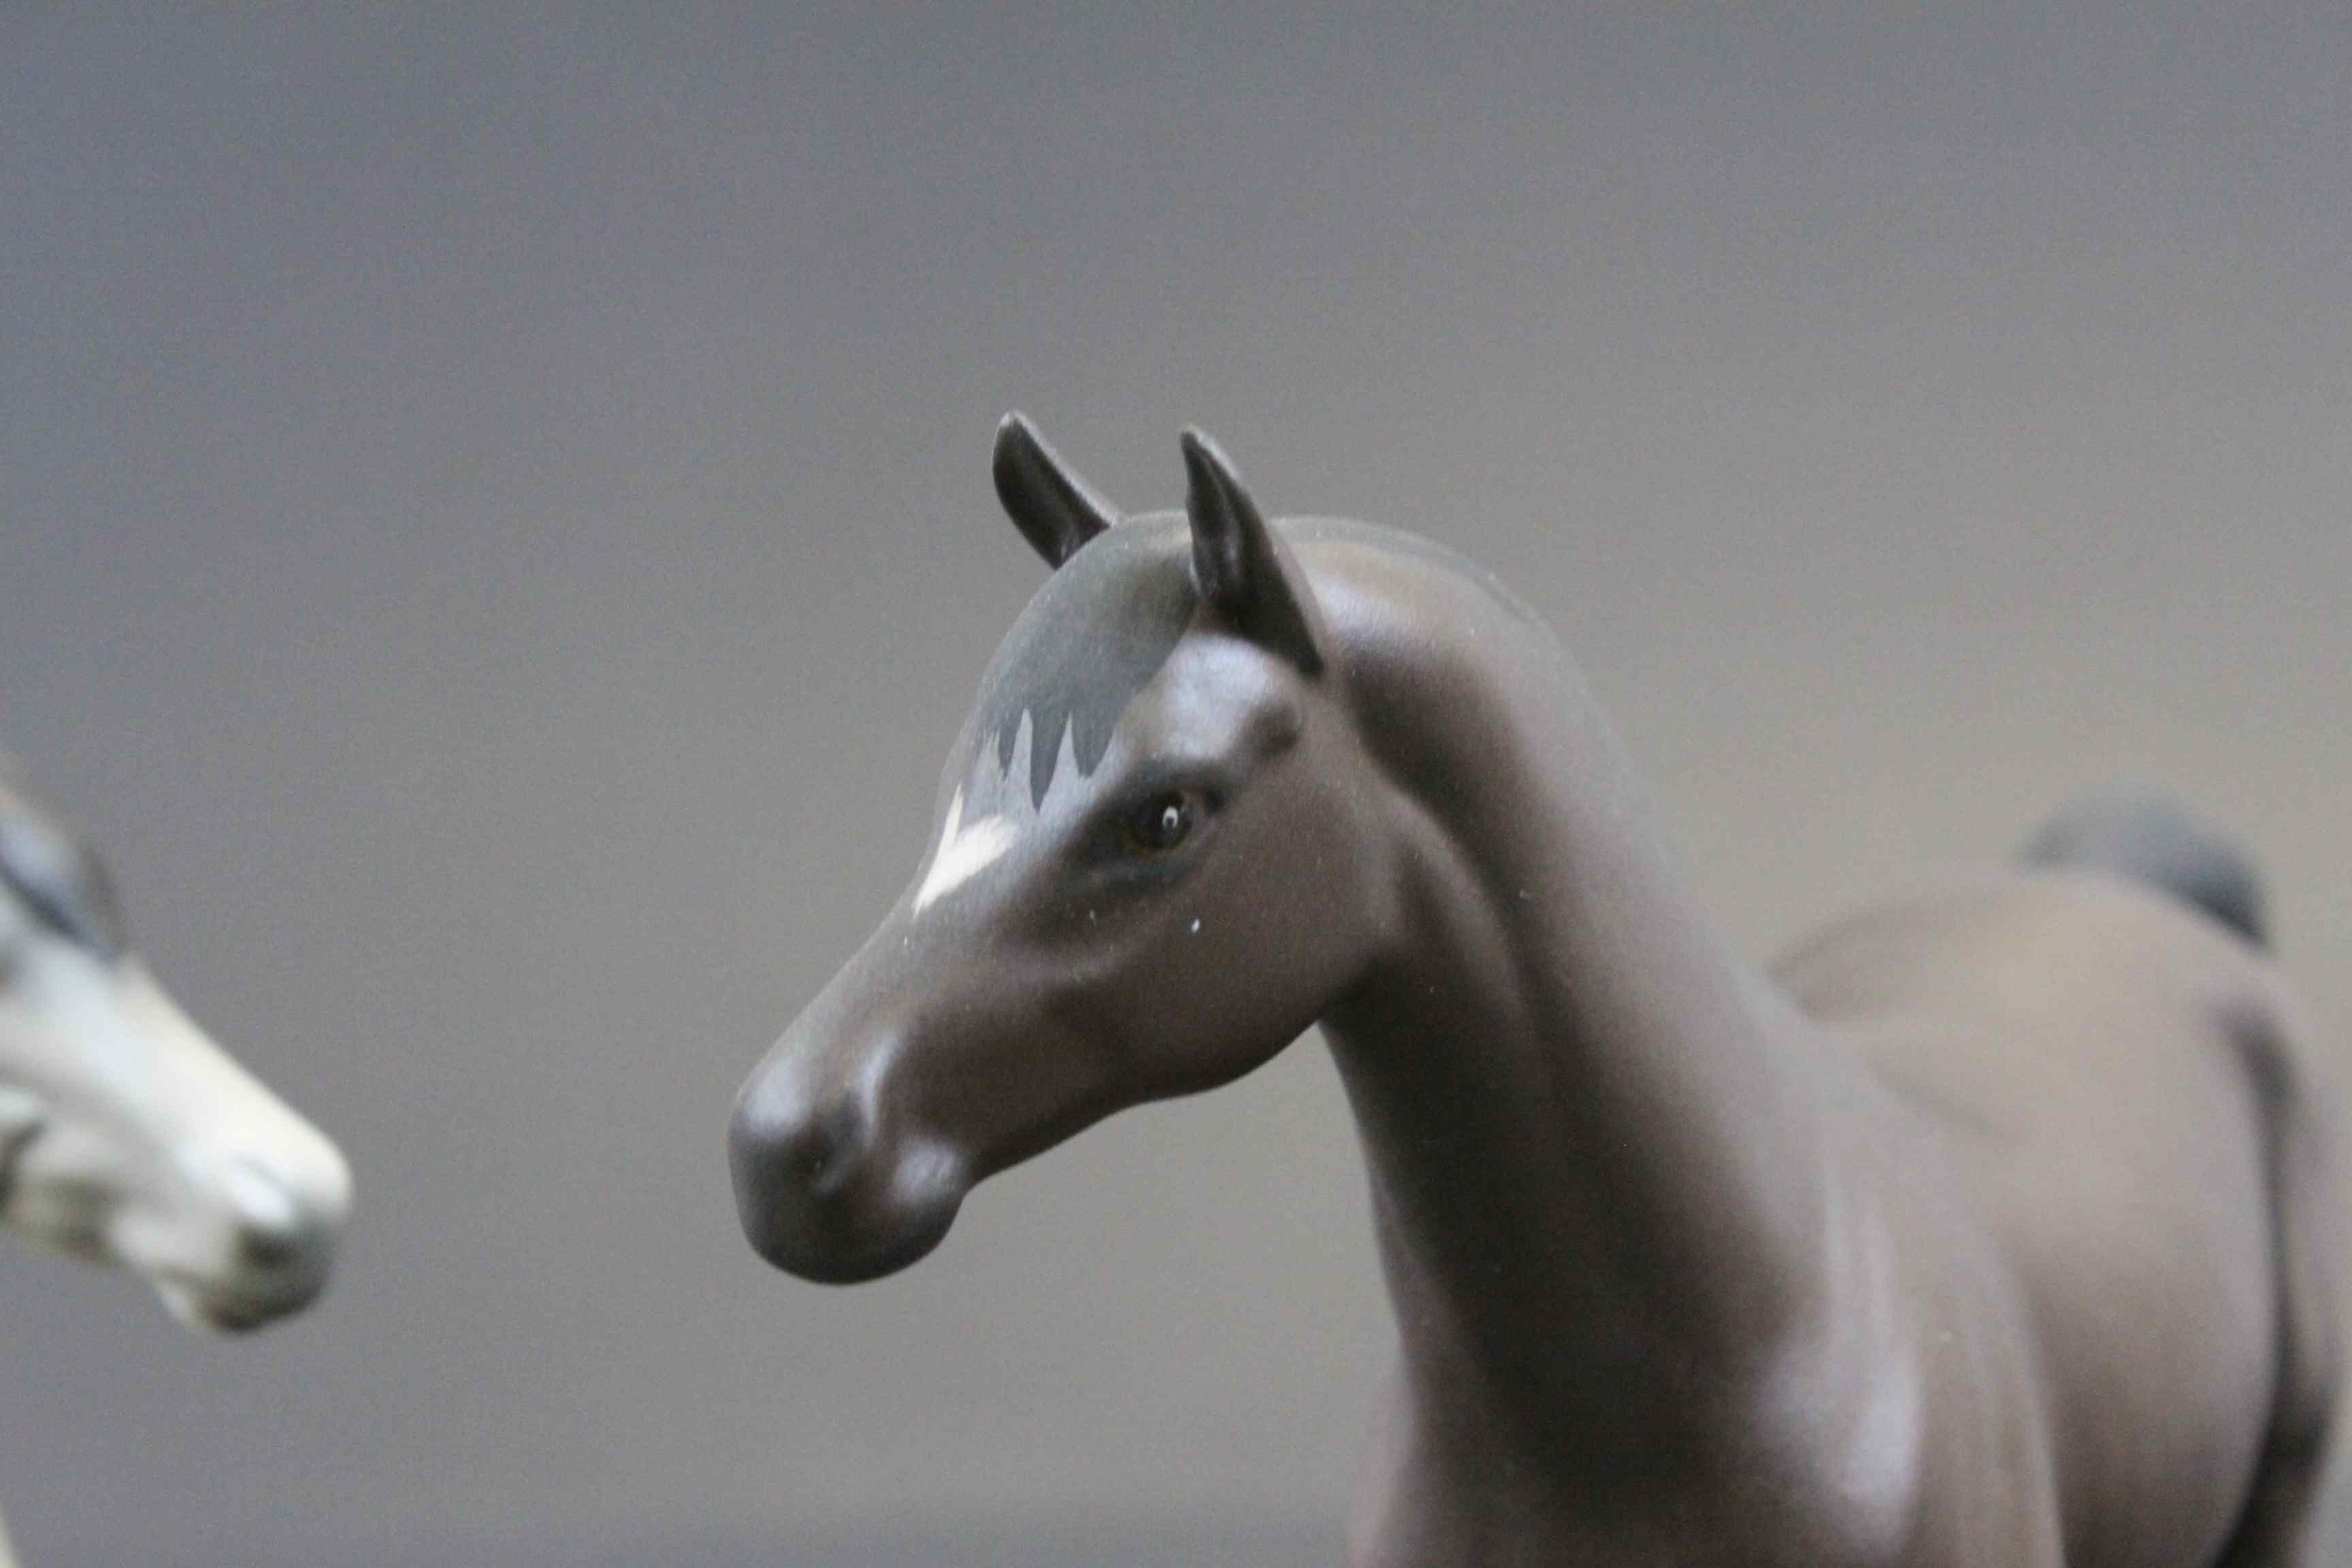 Beswick Connoisseur model horse "Arab Xayal" with wooden base & a Grey Arab - Image 6 of 7